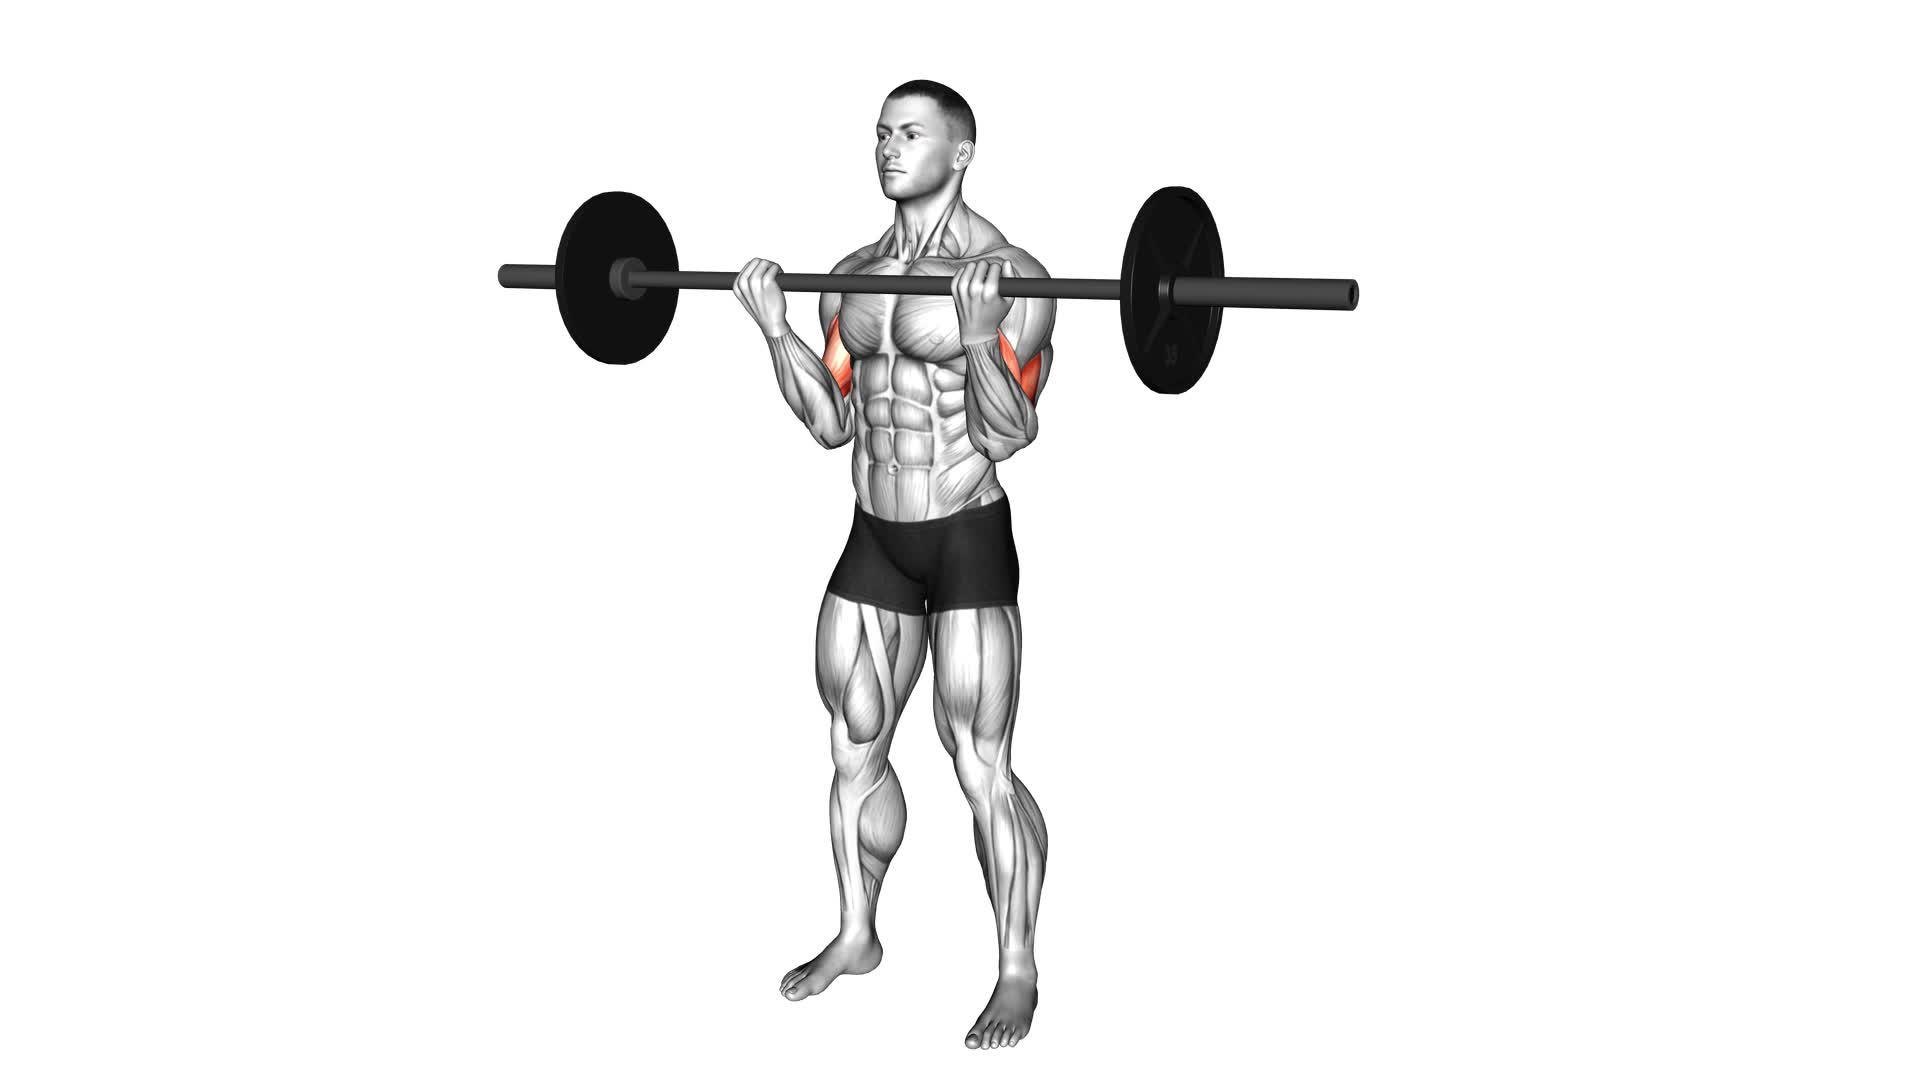 Barbell Curl - Video Exercise Guide & Tips